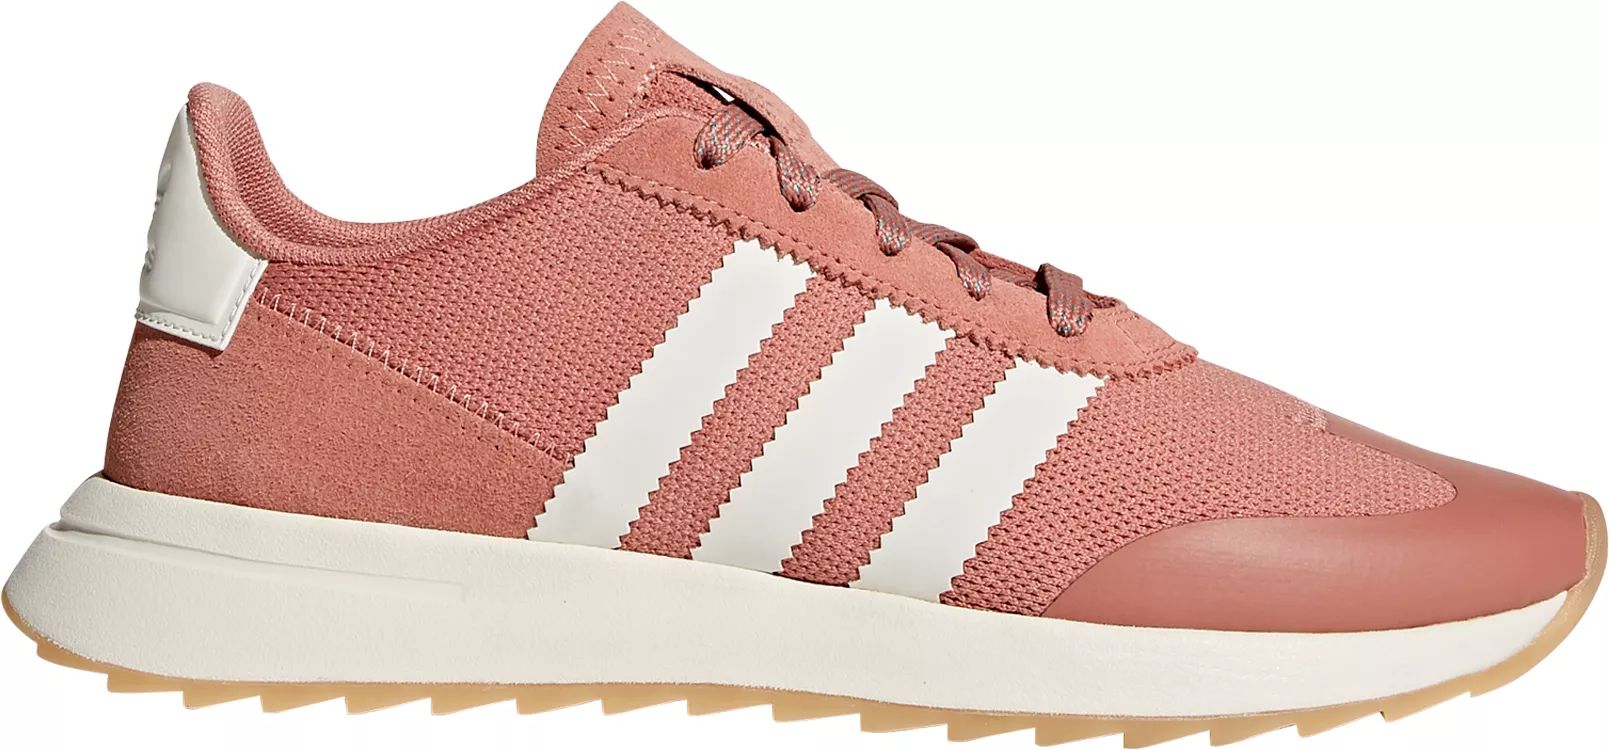 adidas Originals Women's Flashback Shoes, Size: 6.0, Pink | Dick's Sporting Goods